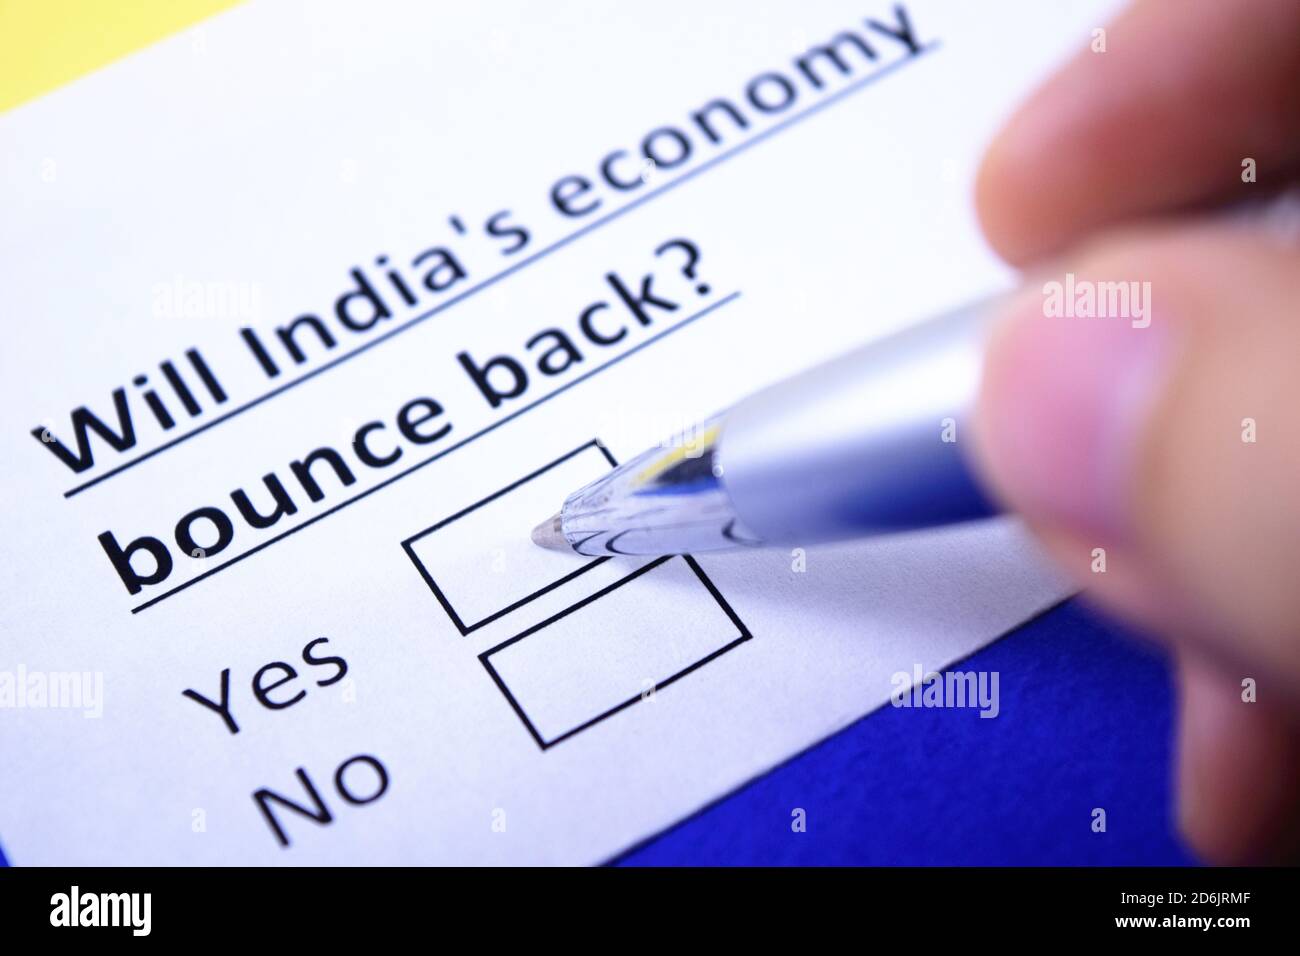 Will India's economy bounce back? Yes or no? Stock Photo